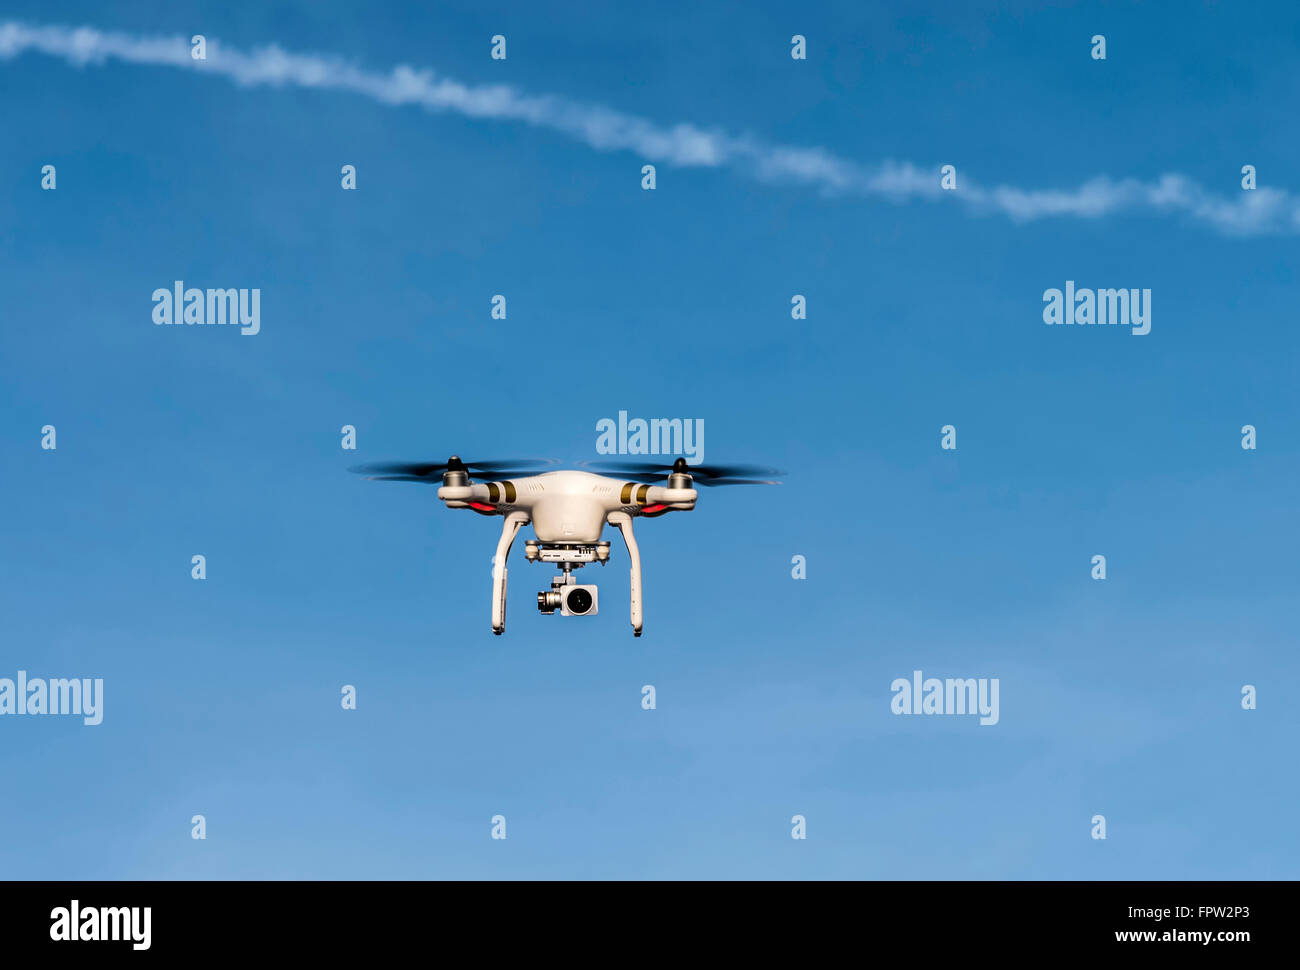 Quadcopter with camera flying in front of a blue sky, Germany Stock Photo